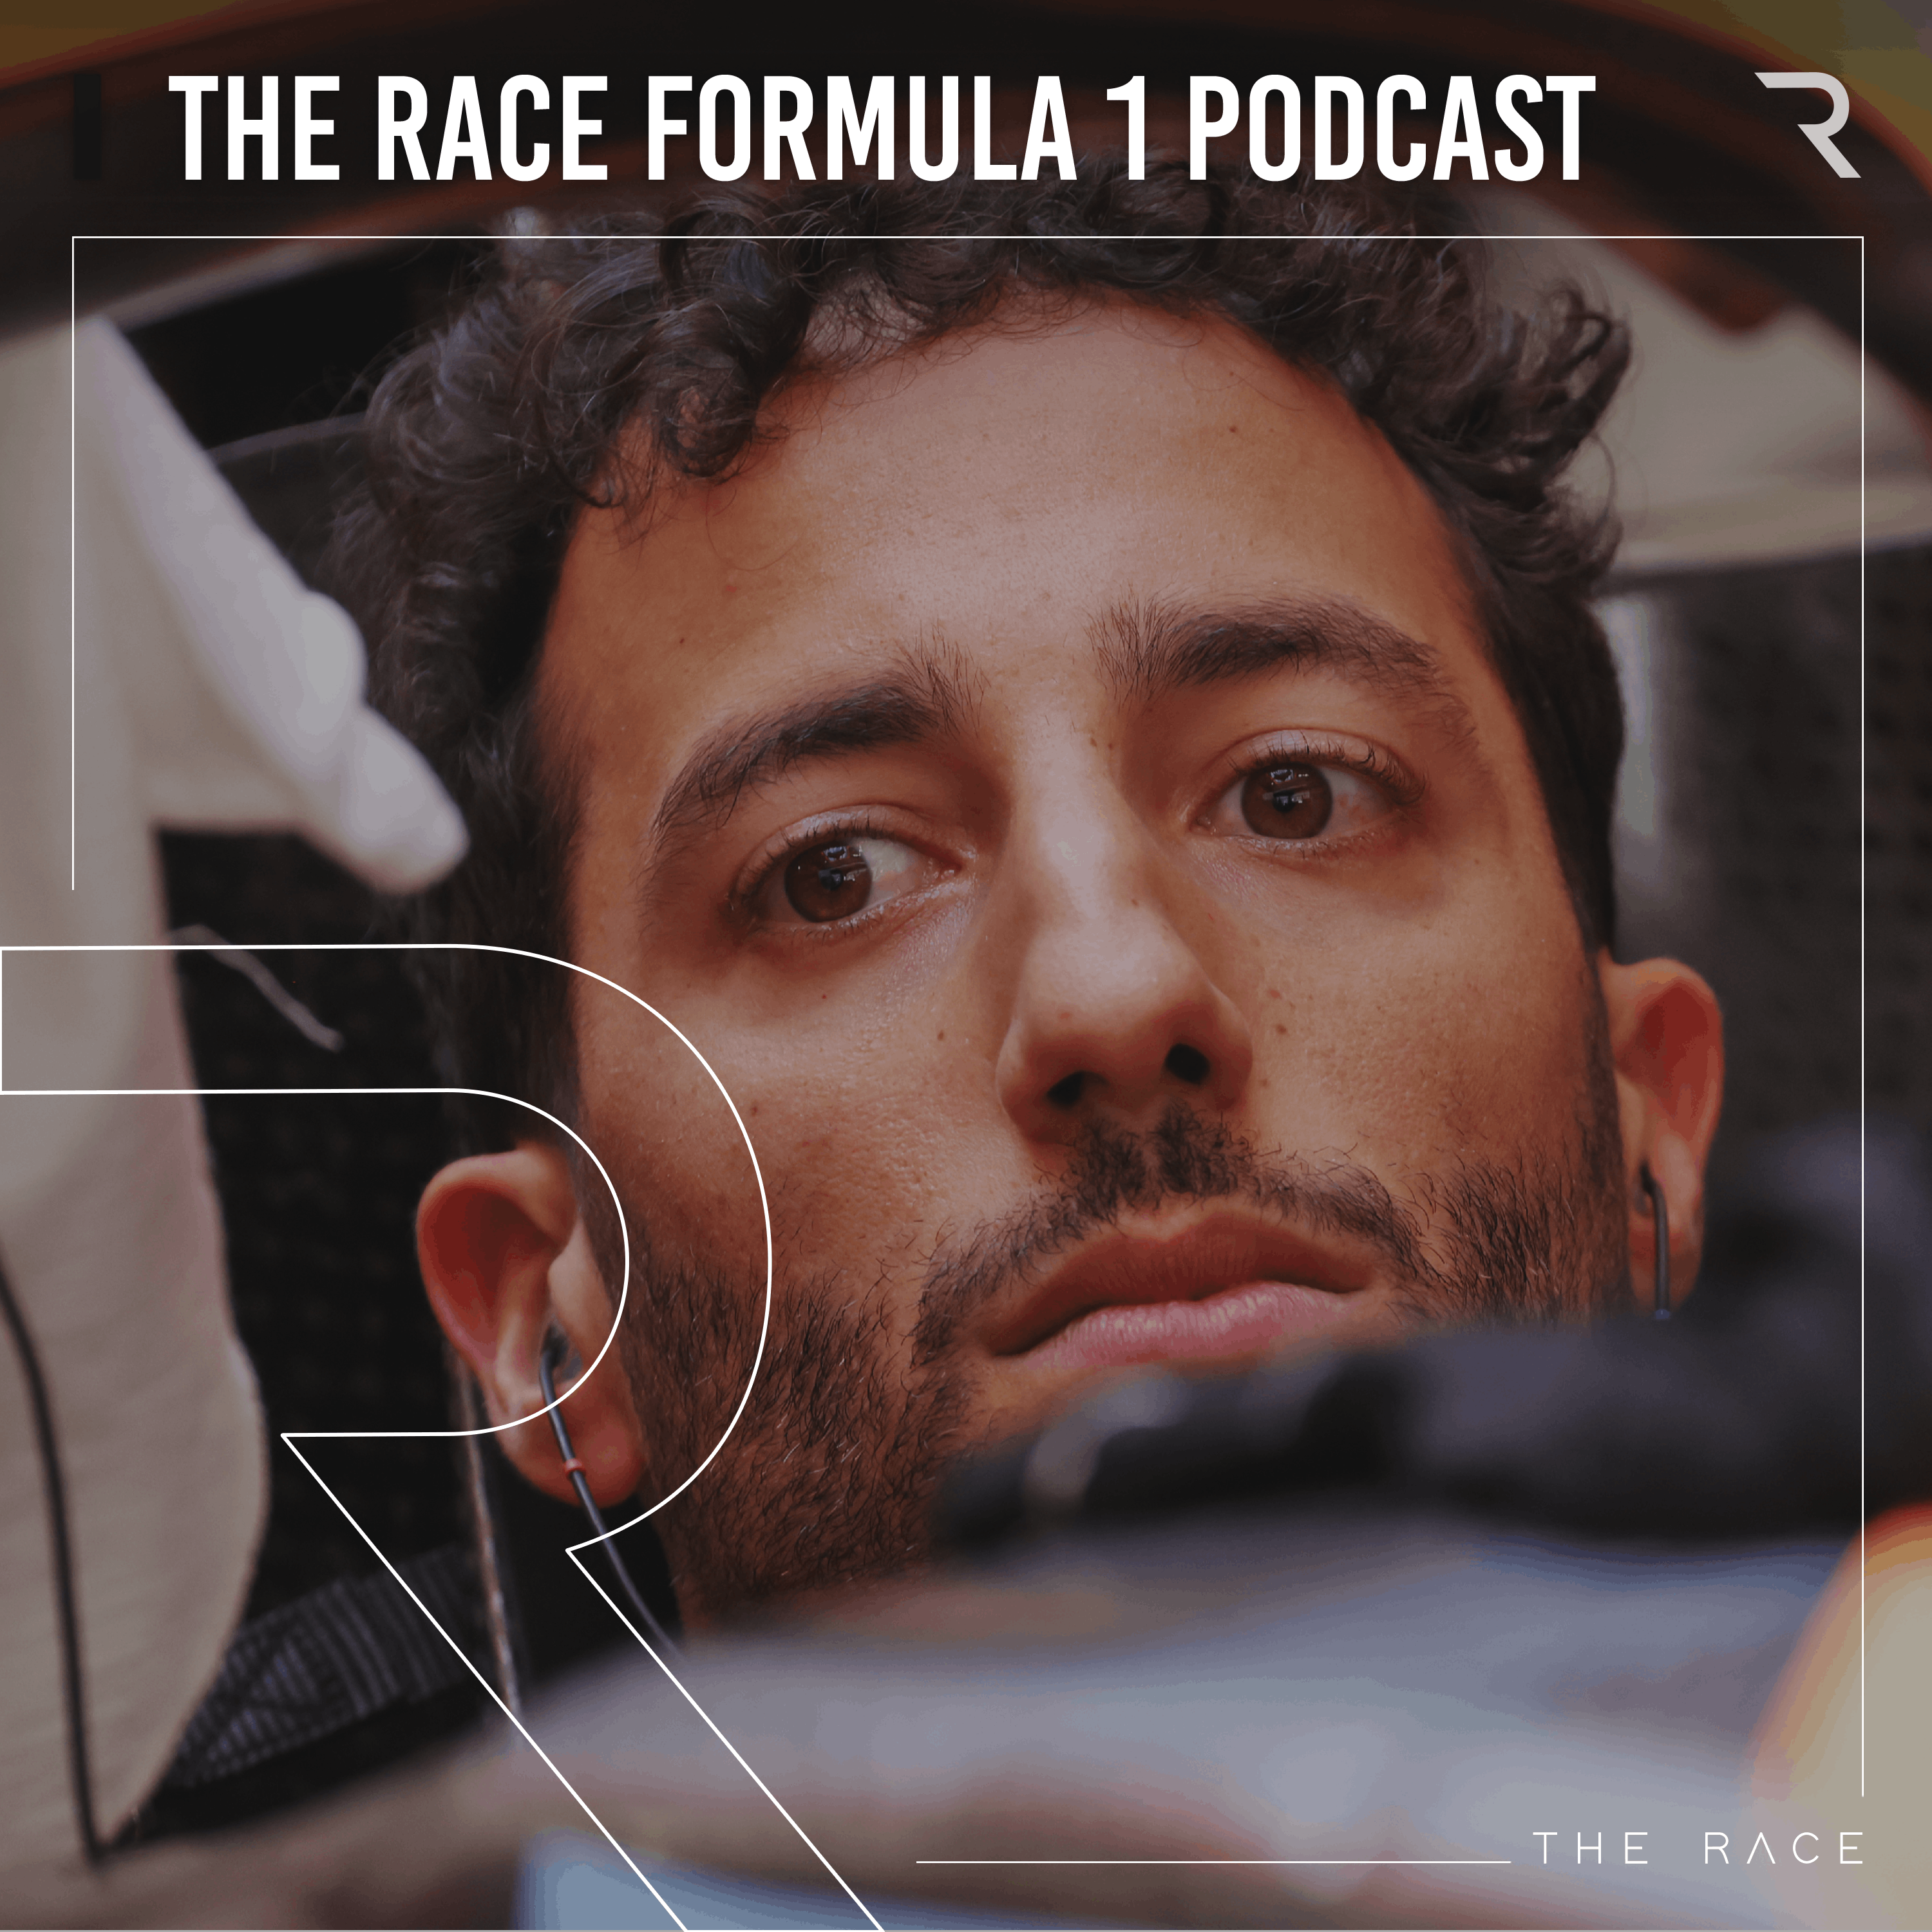 Perez stays, but is Ricciardo on his way out?